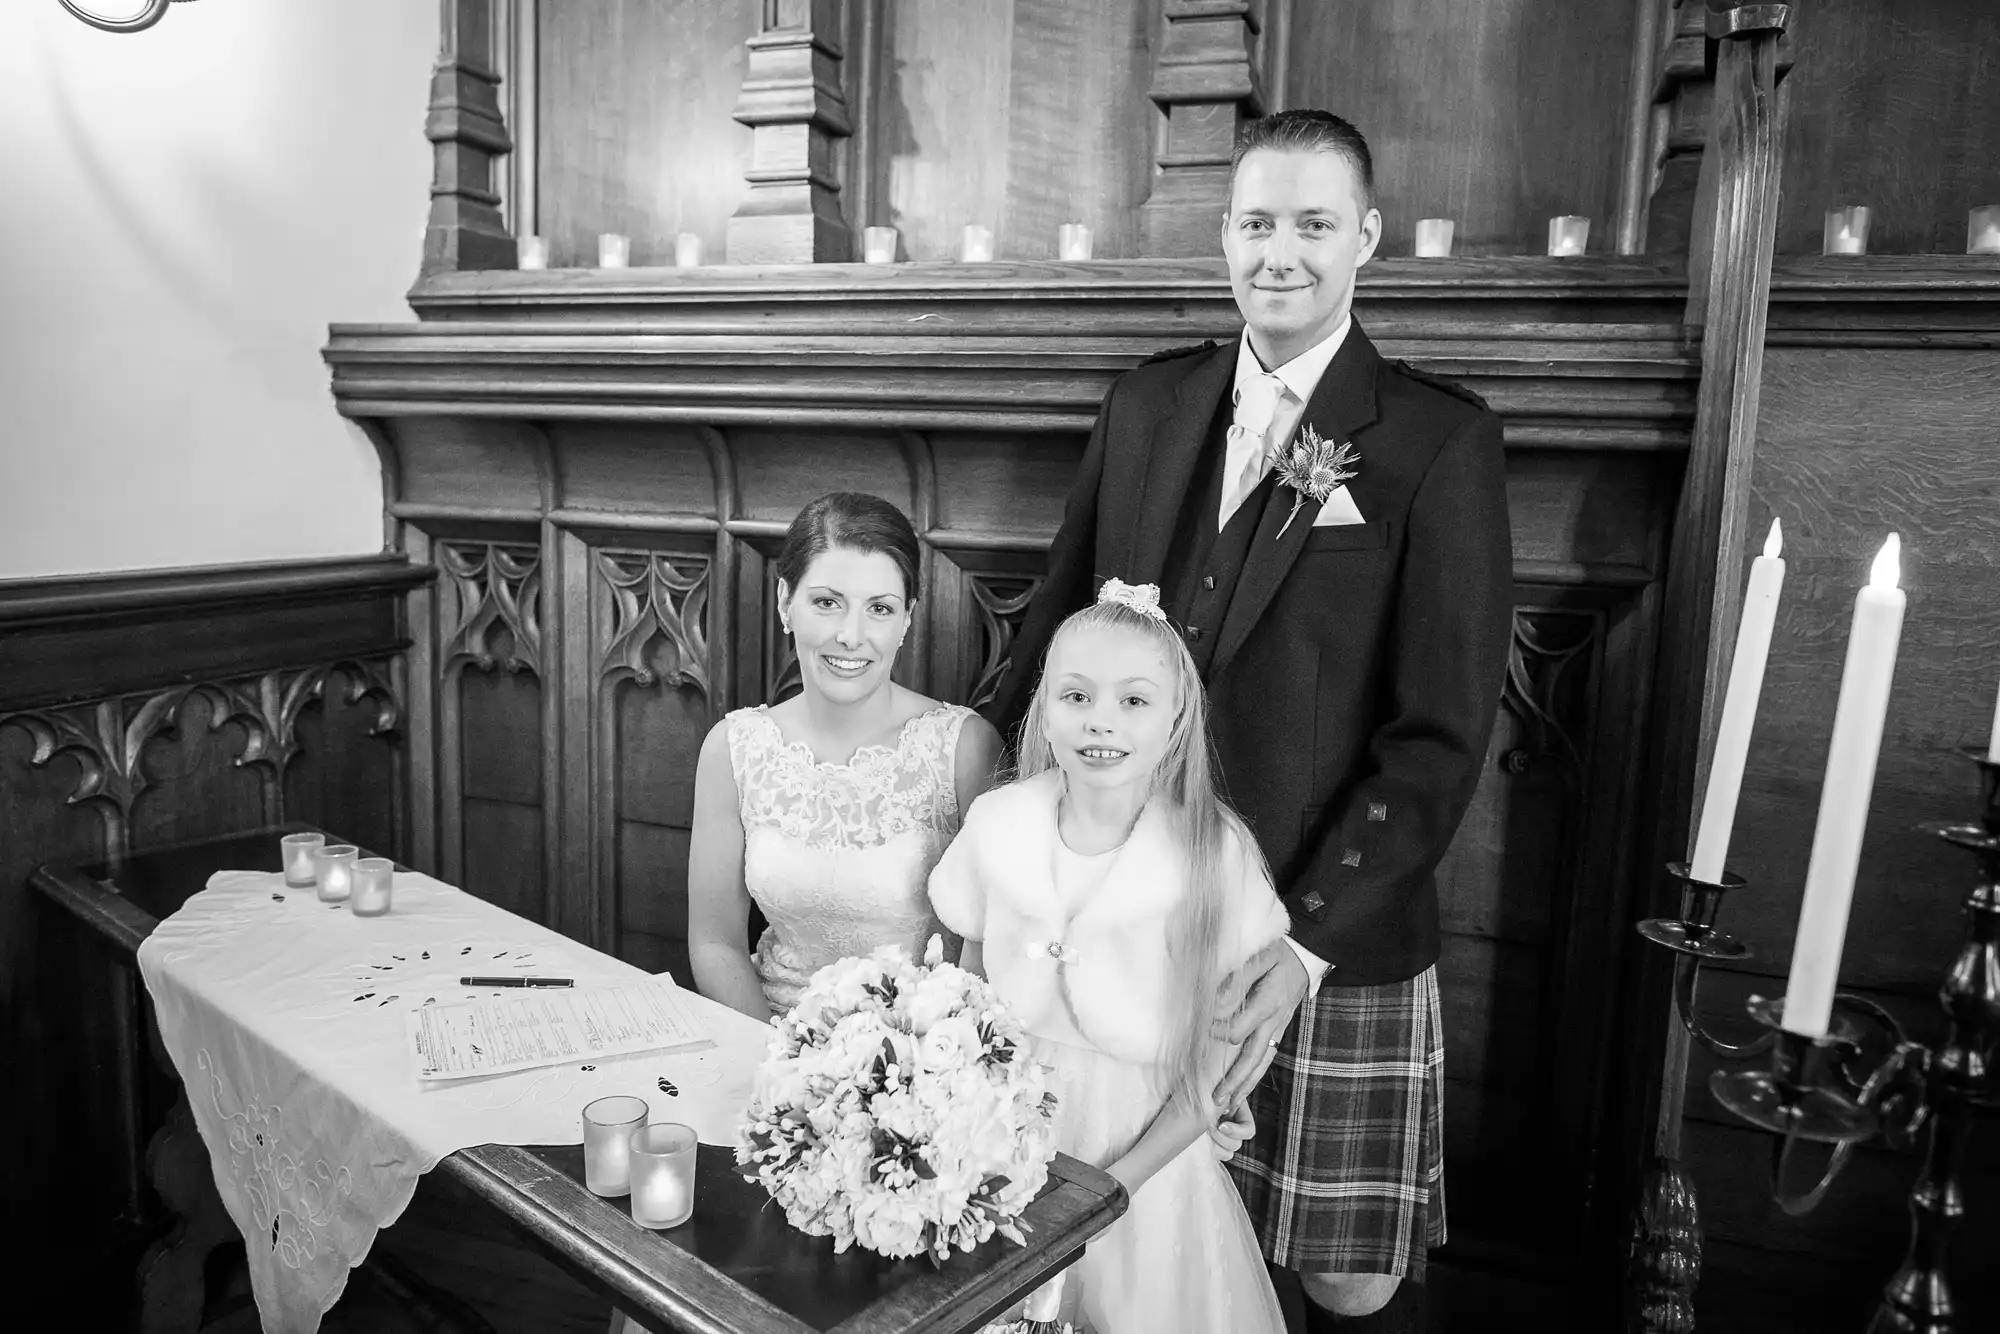 A bride, groom, and young bridesmaid pose beside a signing table with a bouquet and candles in a church ceremony, all in formal attire.